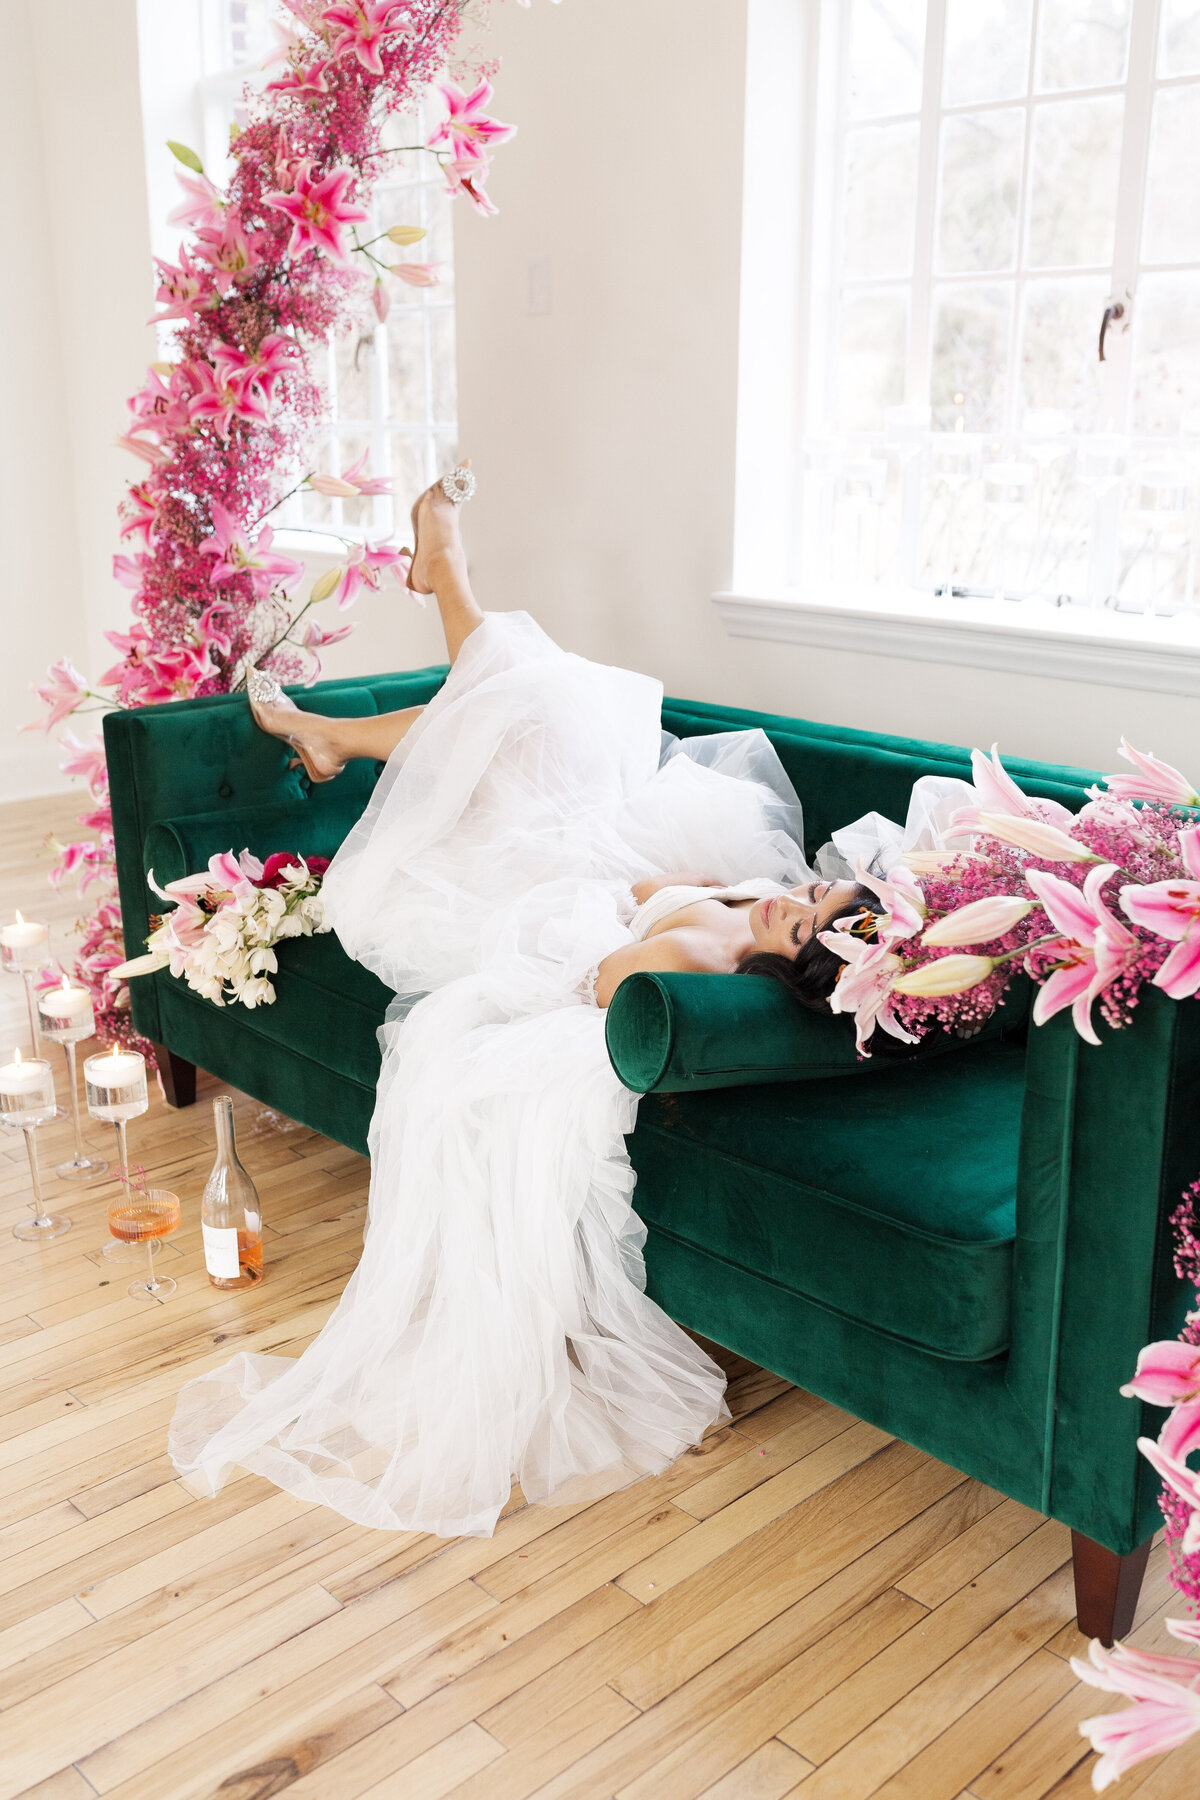 bride lying on an emerald green sofa with pink and white florals